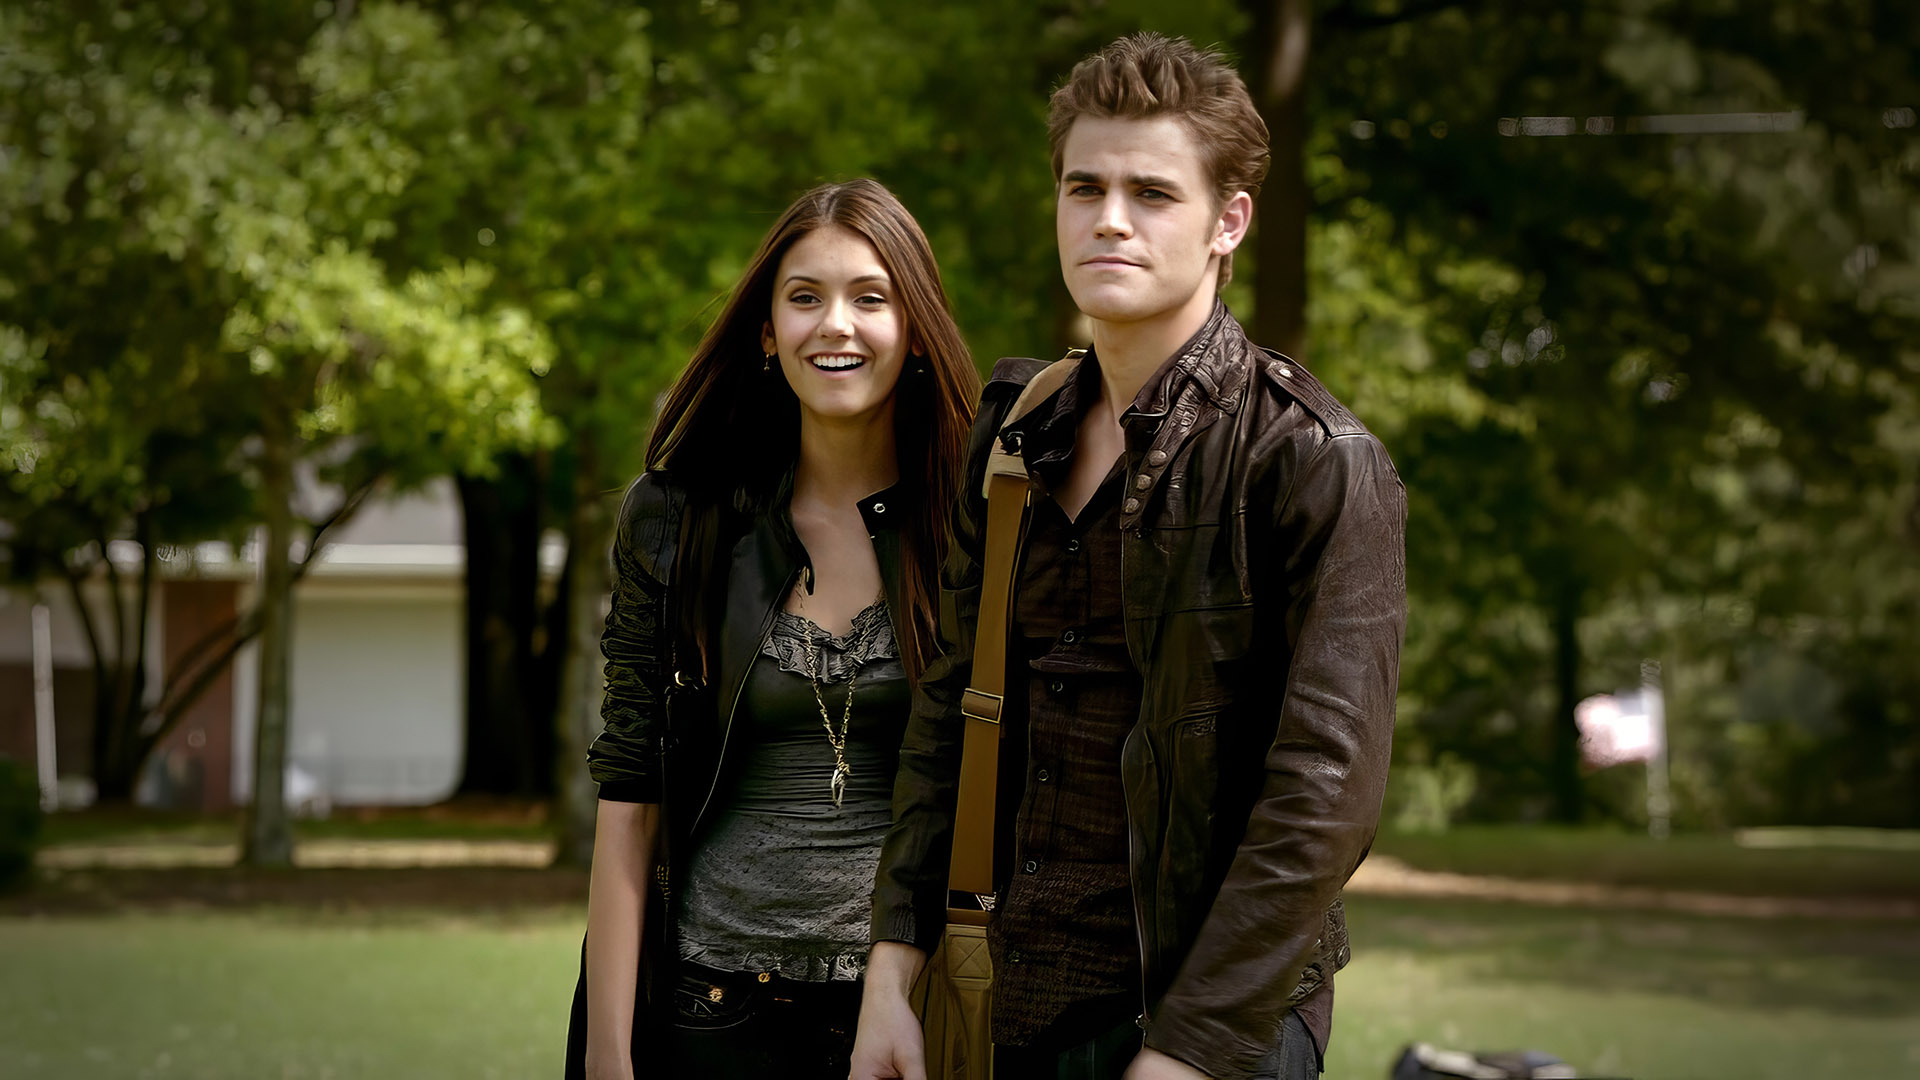 Vampire Diaries Characters vs Cast Real Age Raises Some Eyebrows